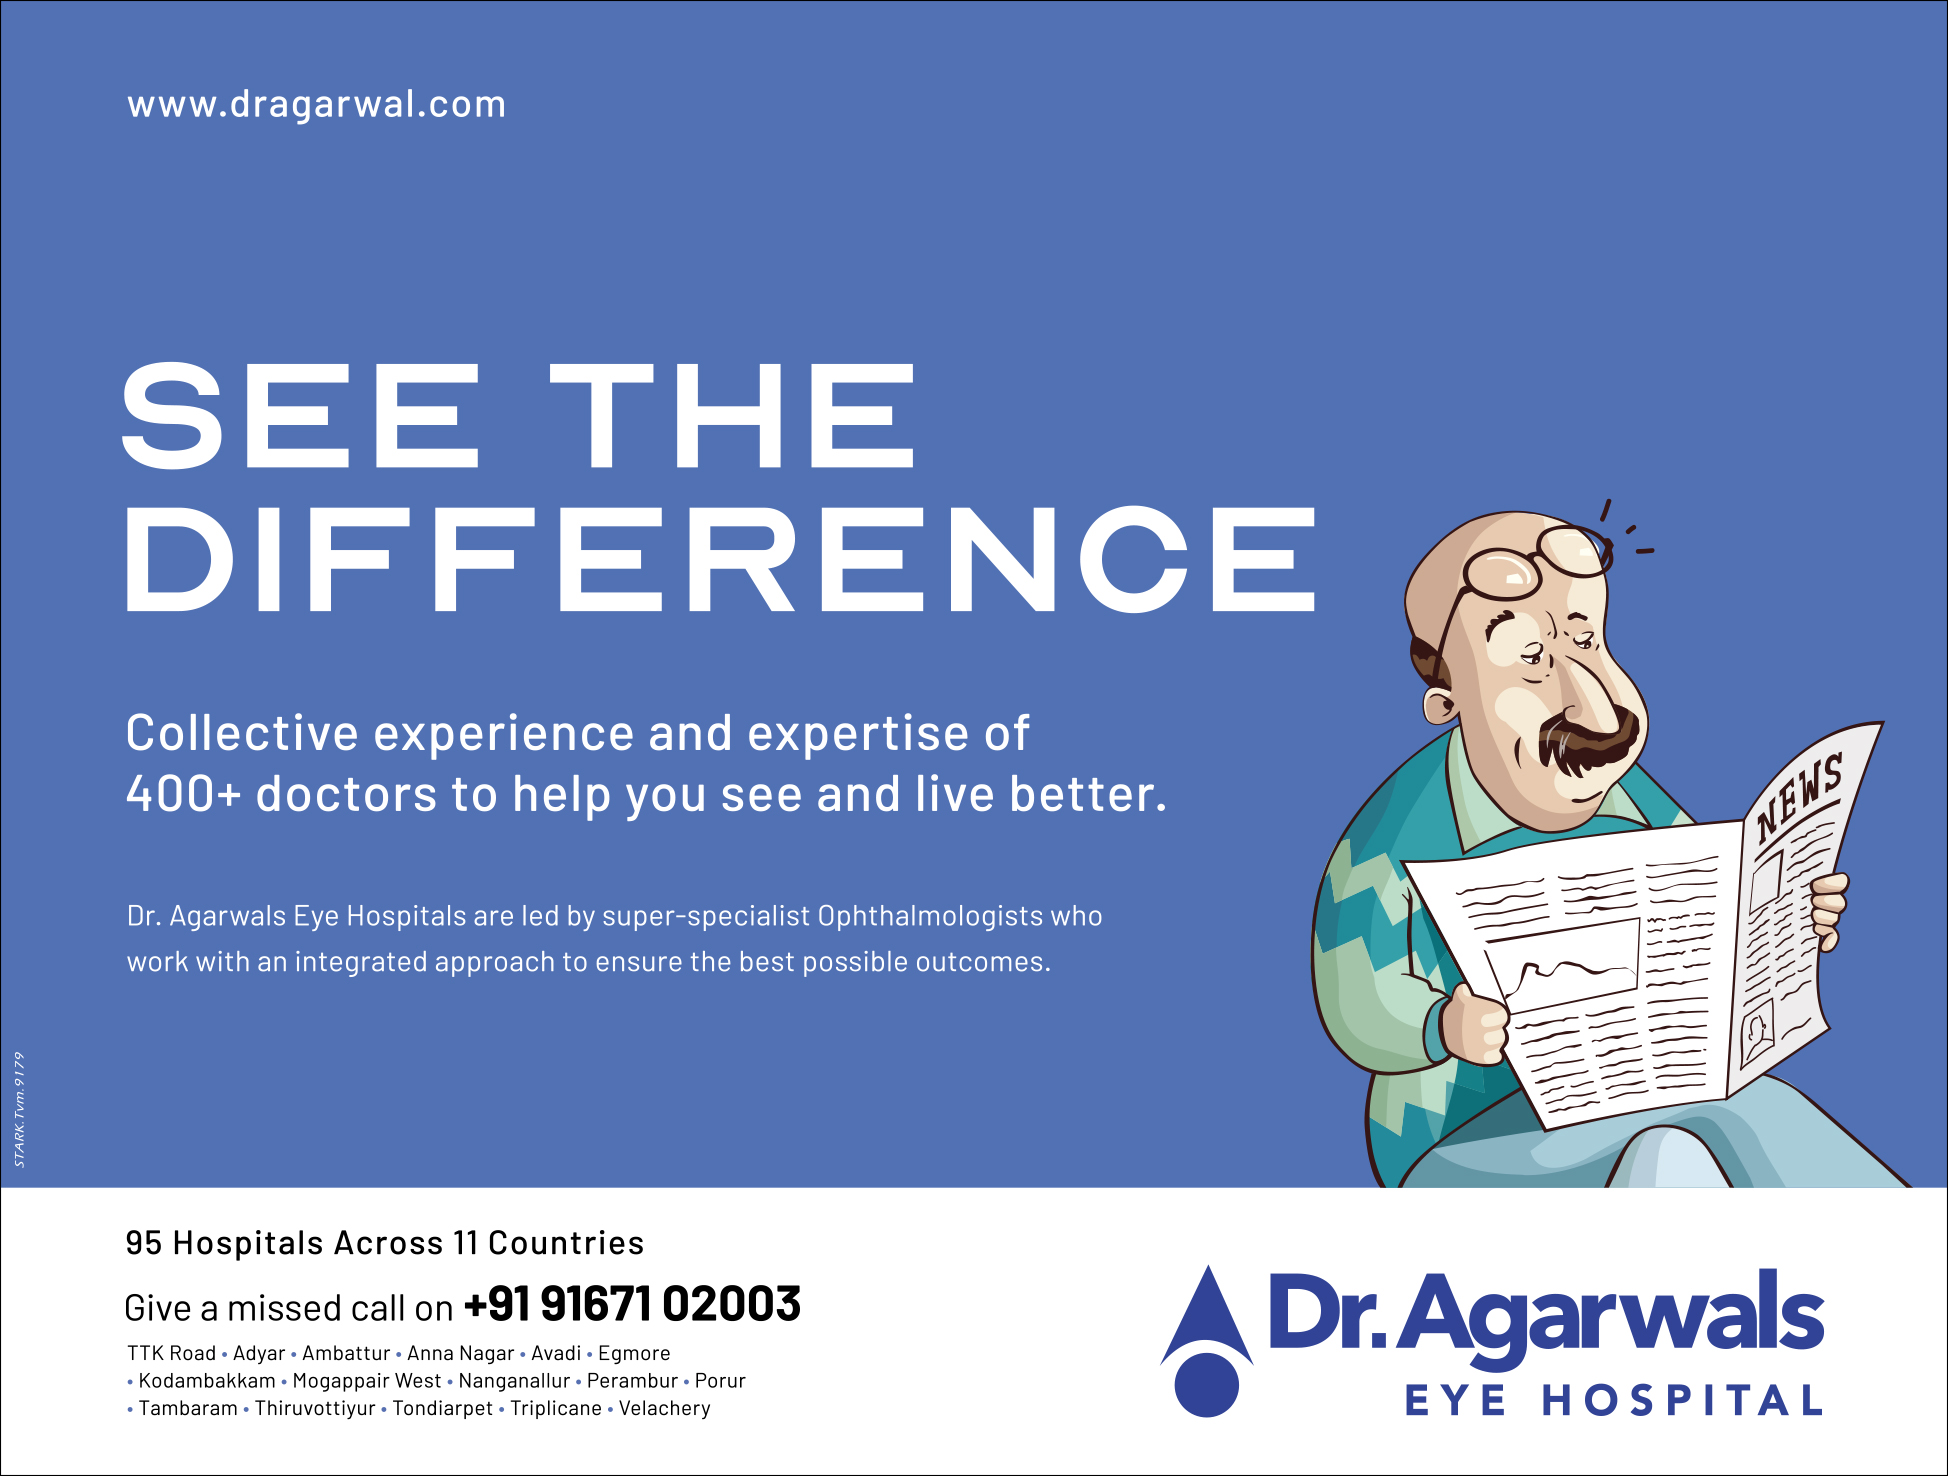 Dr.Agarwals Eye Hospital - See the Difference